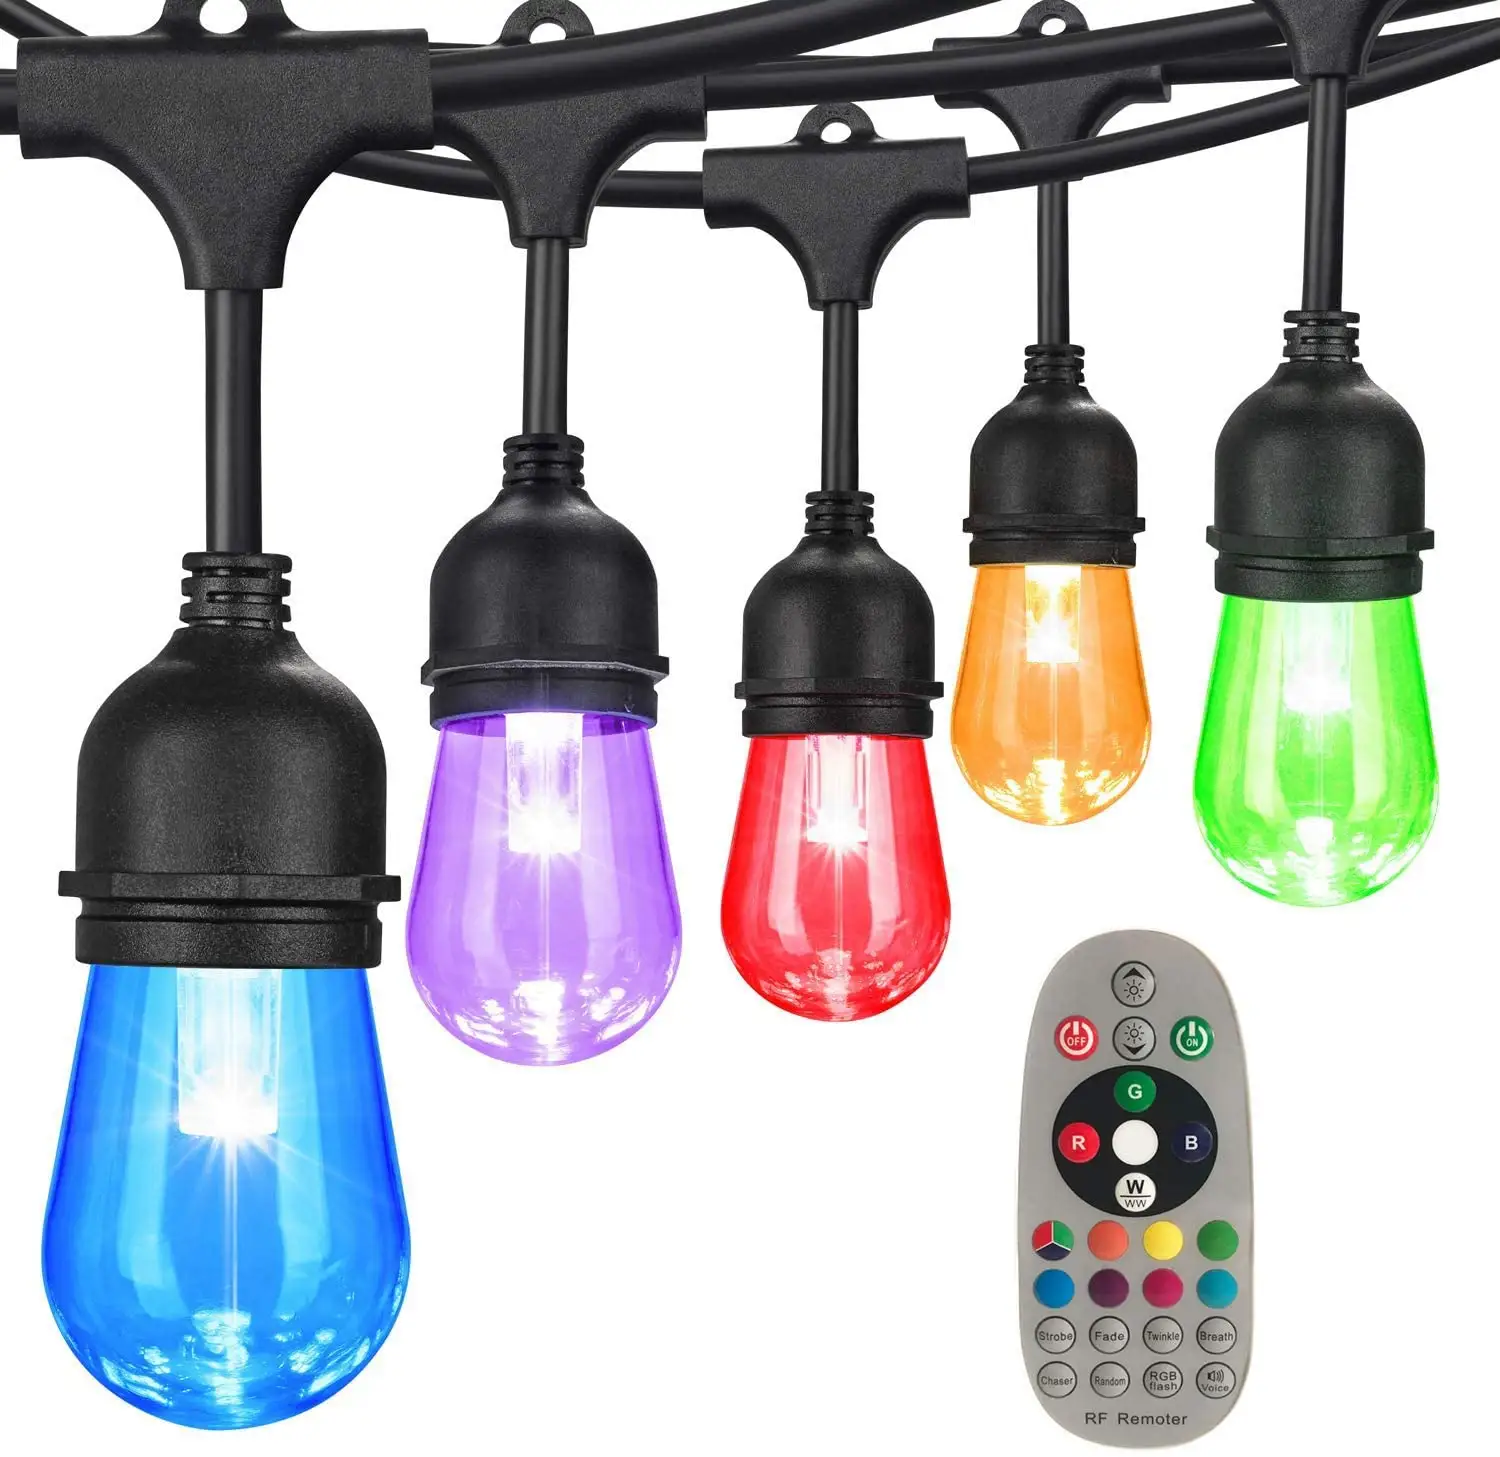 Hot Sell New Hanging Chair Solar Patio Festoon Led String Lights Color Changing RGB Cafe Lamp Outdoor Indoor Festival Lantern